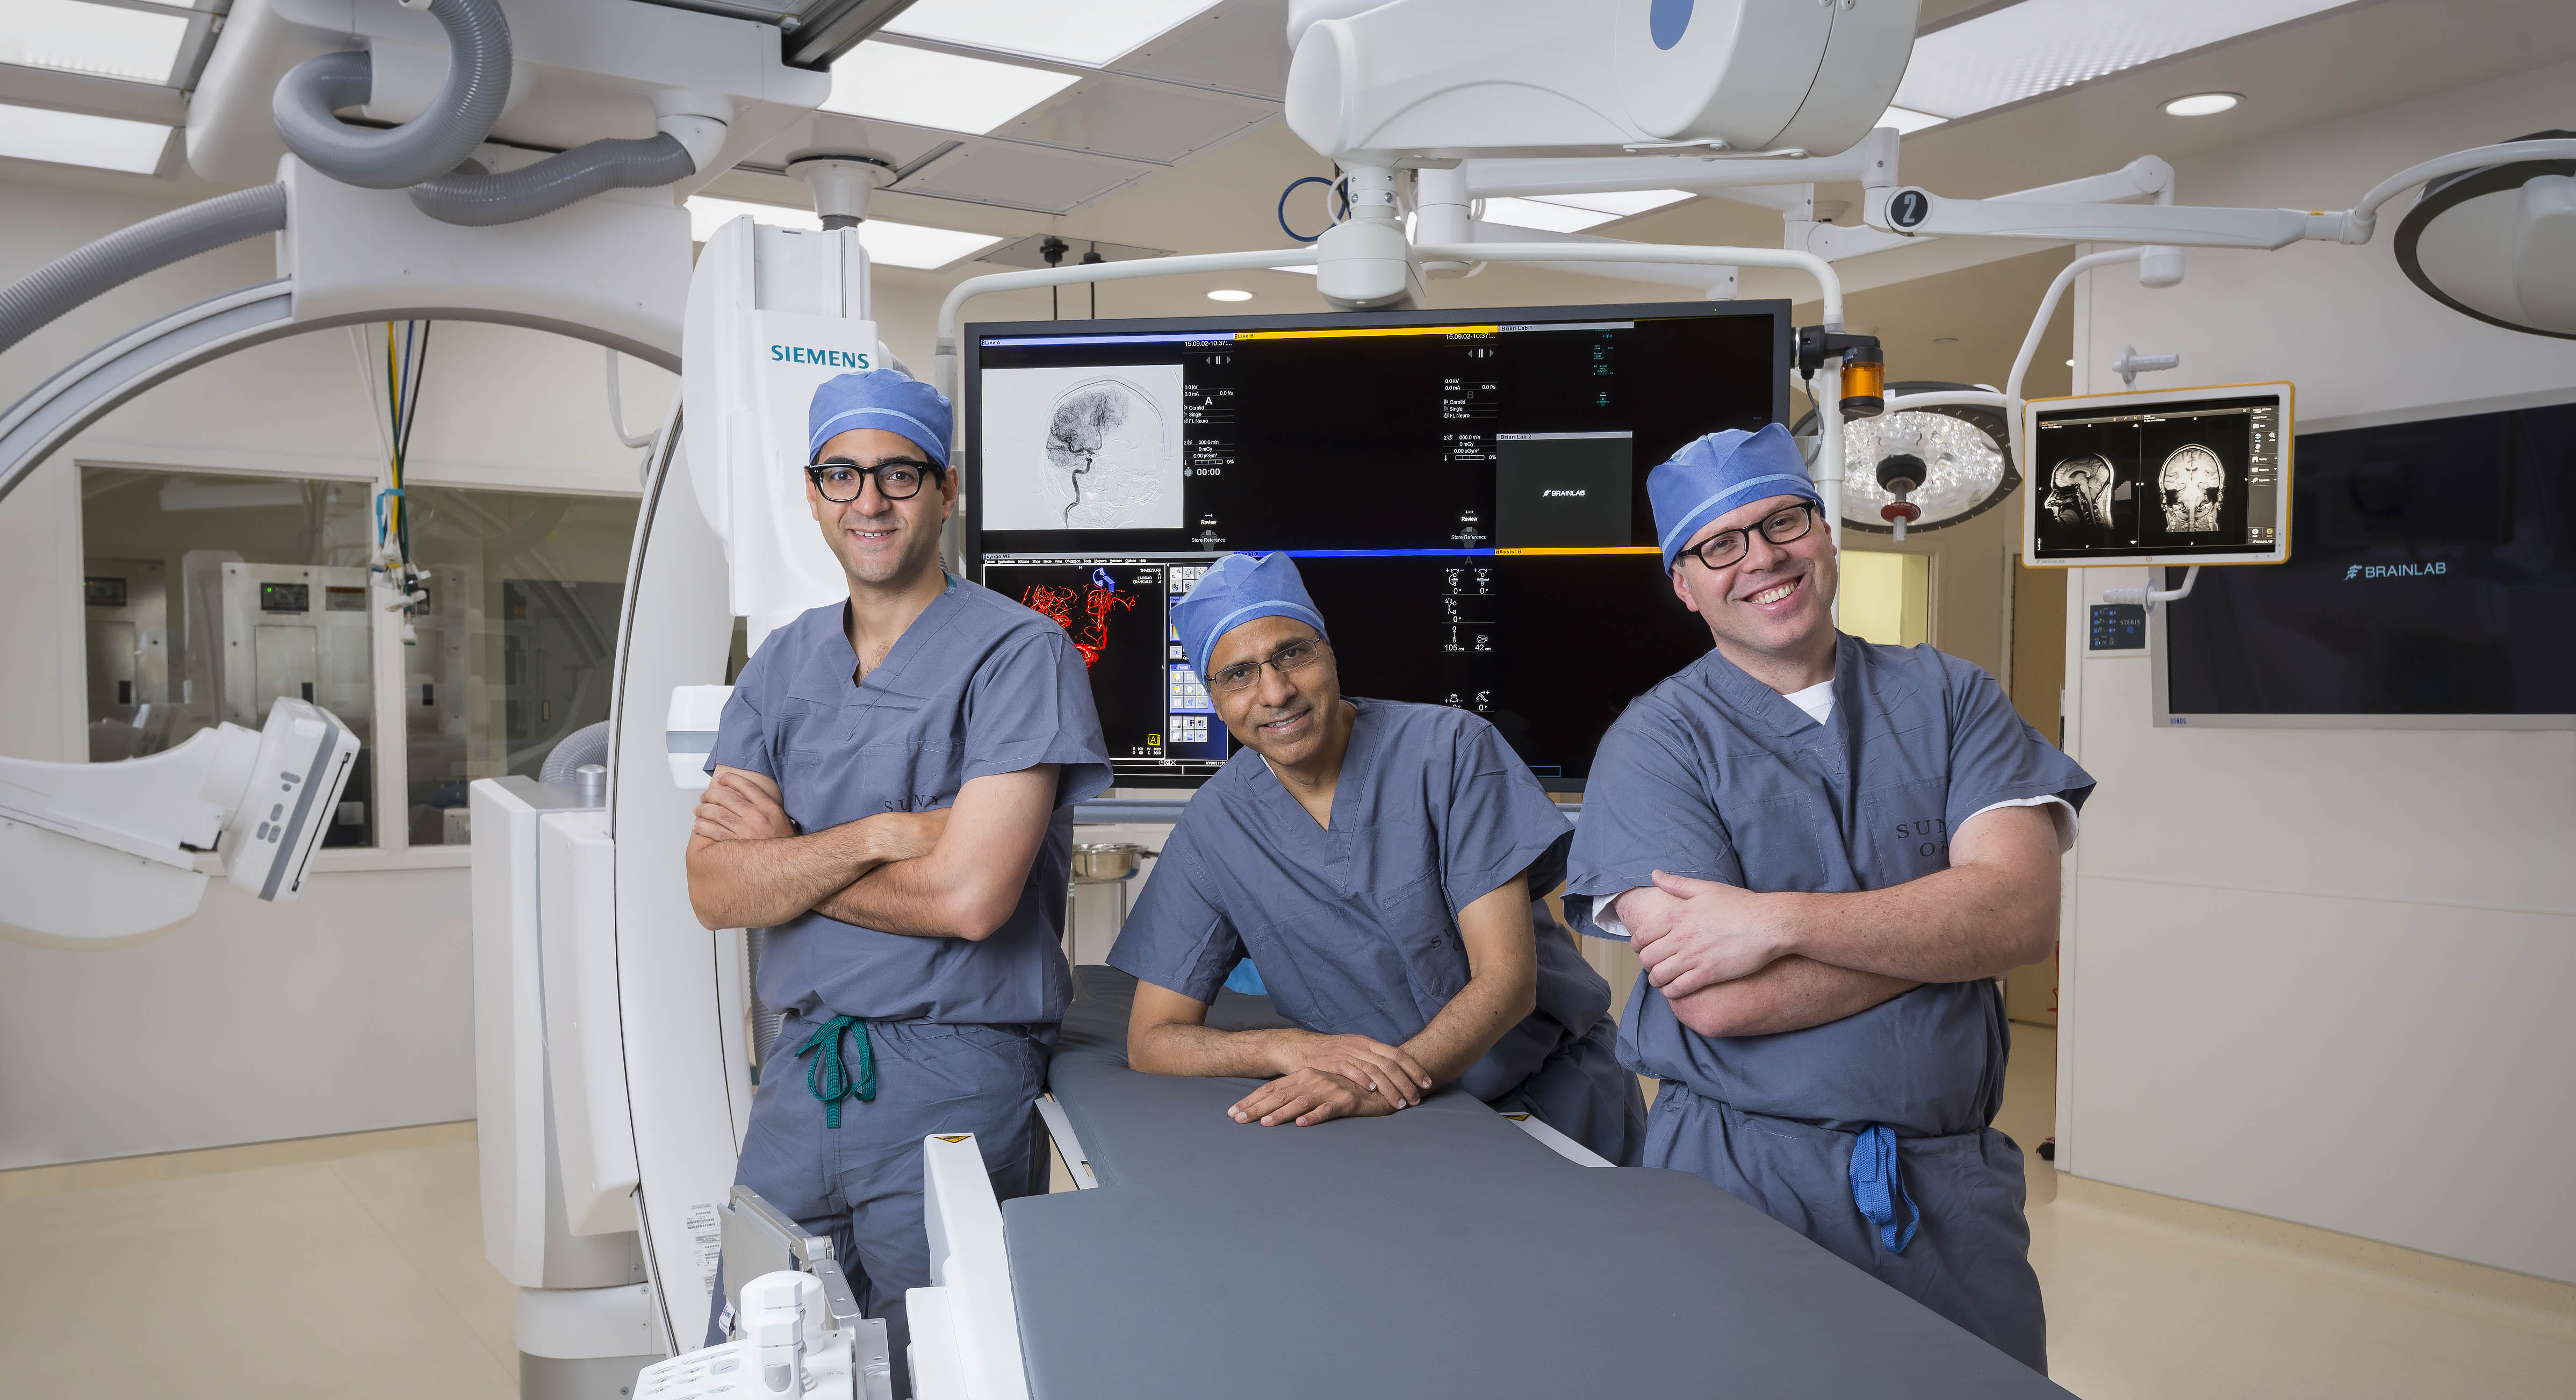 (From left) Hesham Masoud, MBBCh, Amar Swarnkar, MD, and Grahame Gould, MD, are colleagues at Upstate. (PHOTO BY ROBERT MESCAVAGE)